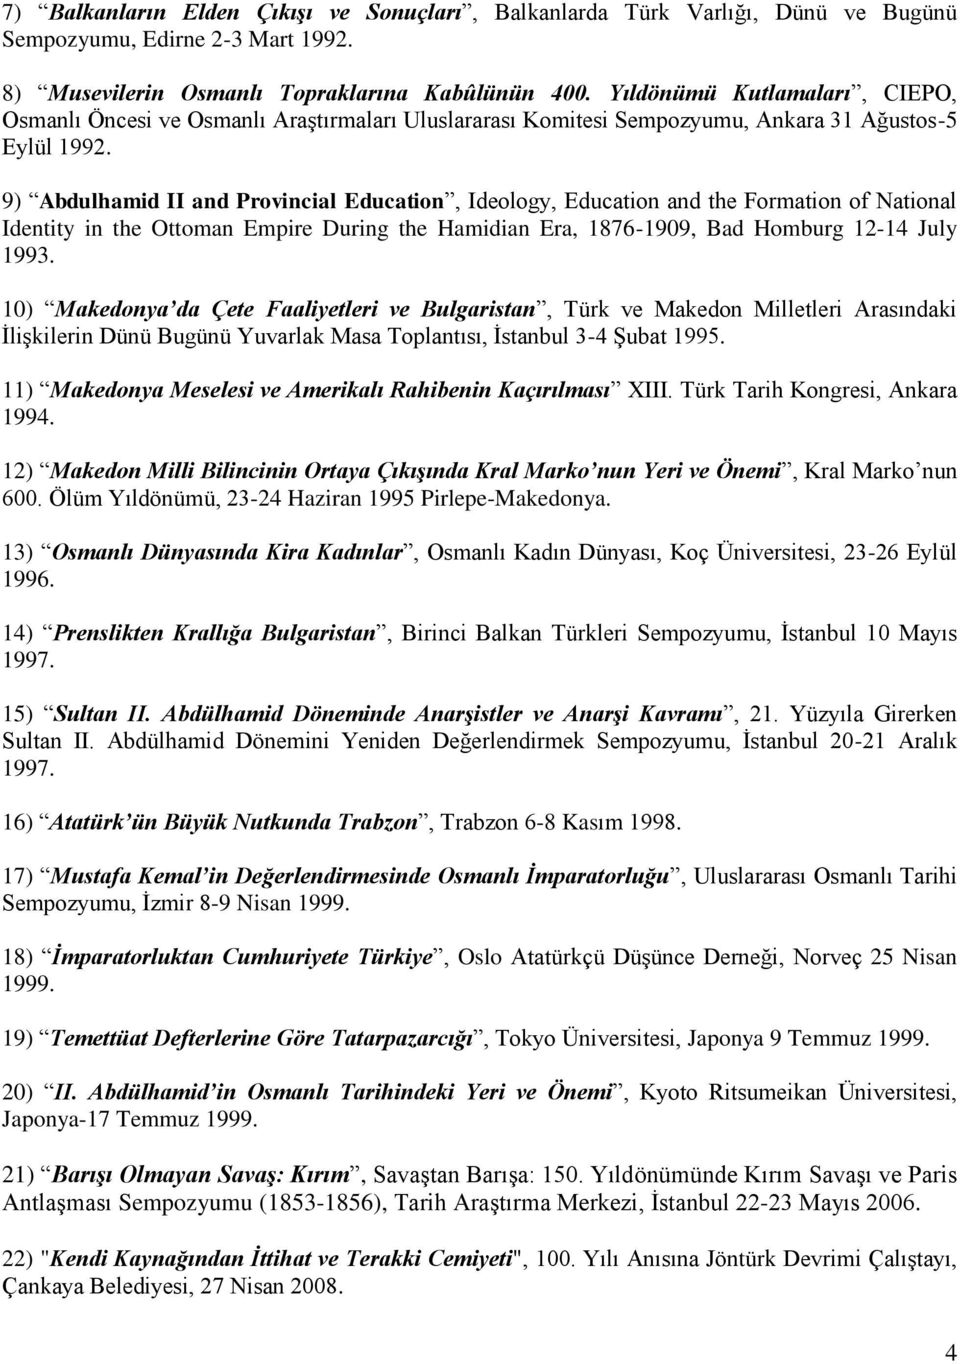 9) Abdulhamid II and Provincial Education, Ideology, Education and the Formation of National Identity in the Ottoman Empire During the Hamidian Era, 1876-1909, Bad Homburg 12-14 July 1993.